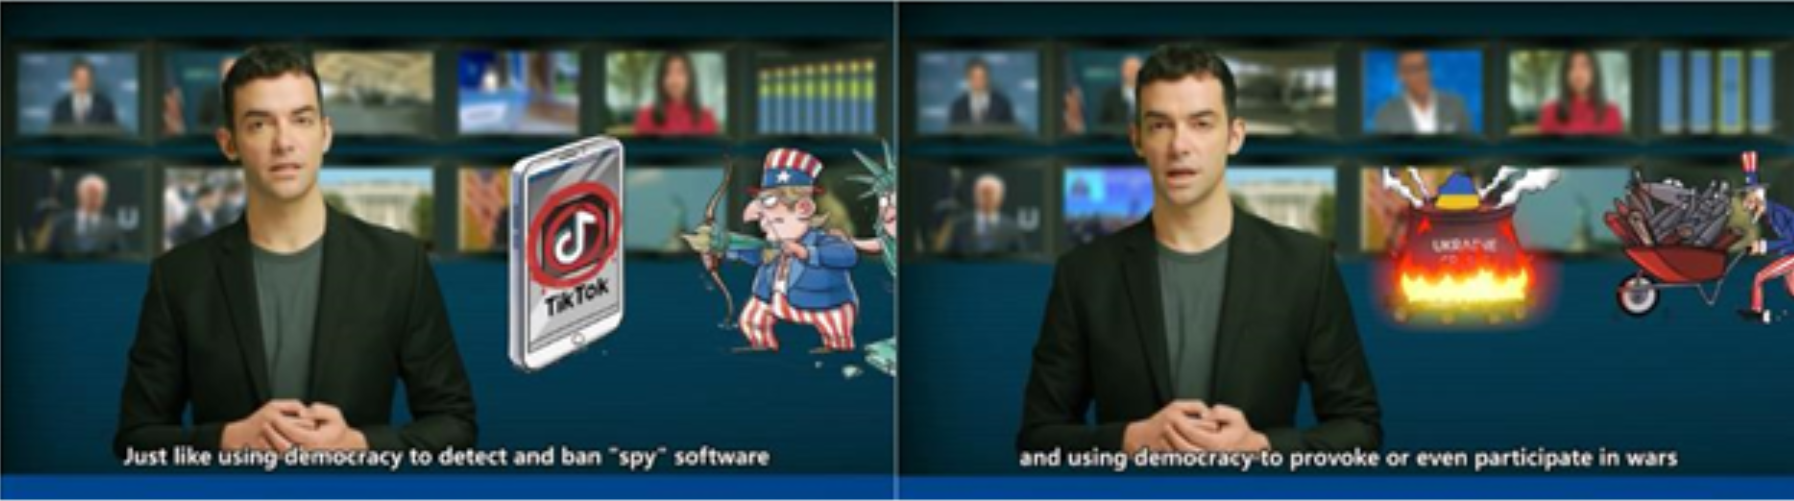 Screenshots from video containing AI-generated "news presenter" promoted by DRAGONBRIDGE, likely created using a platform offered by D-ID